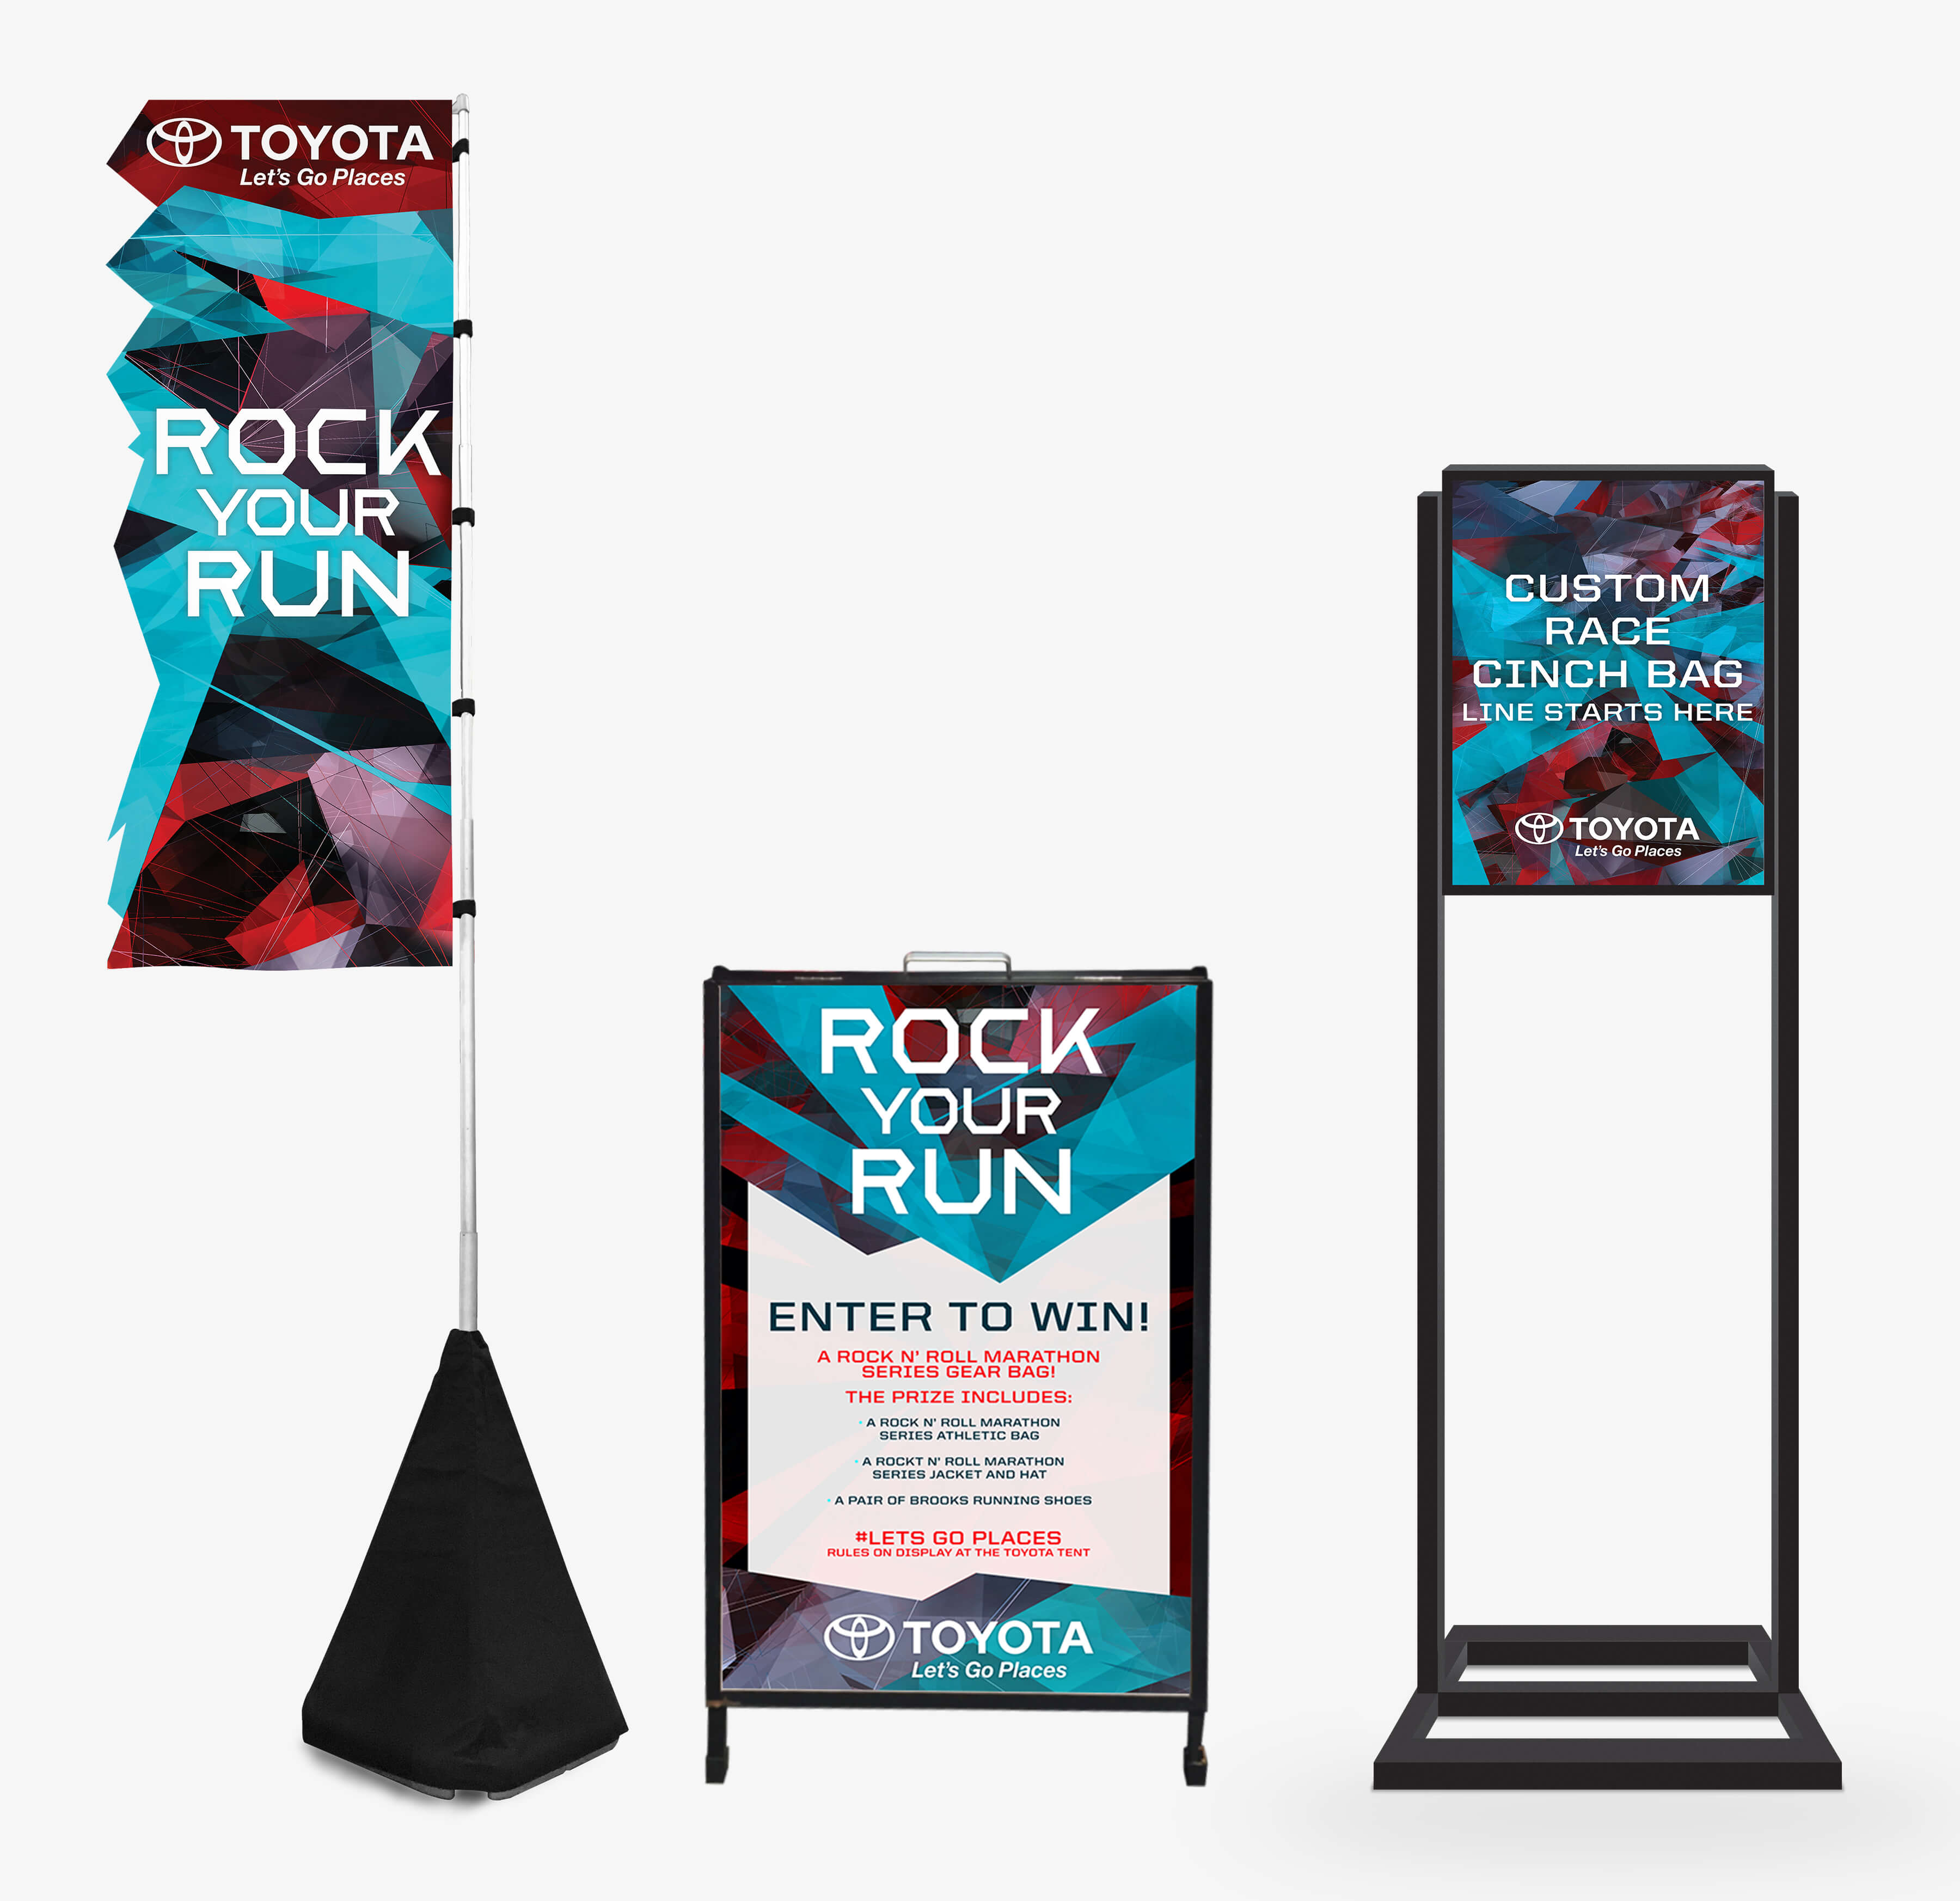 Toyota Rock Your Run. Stills featuring the Mamba flag, sweepstakes sign, the stanchion topper.